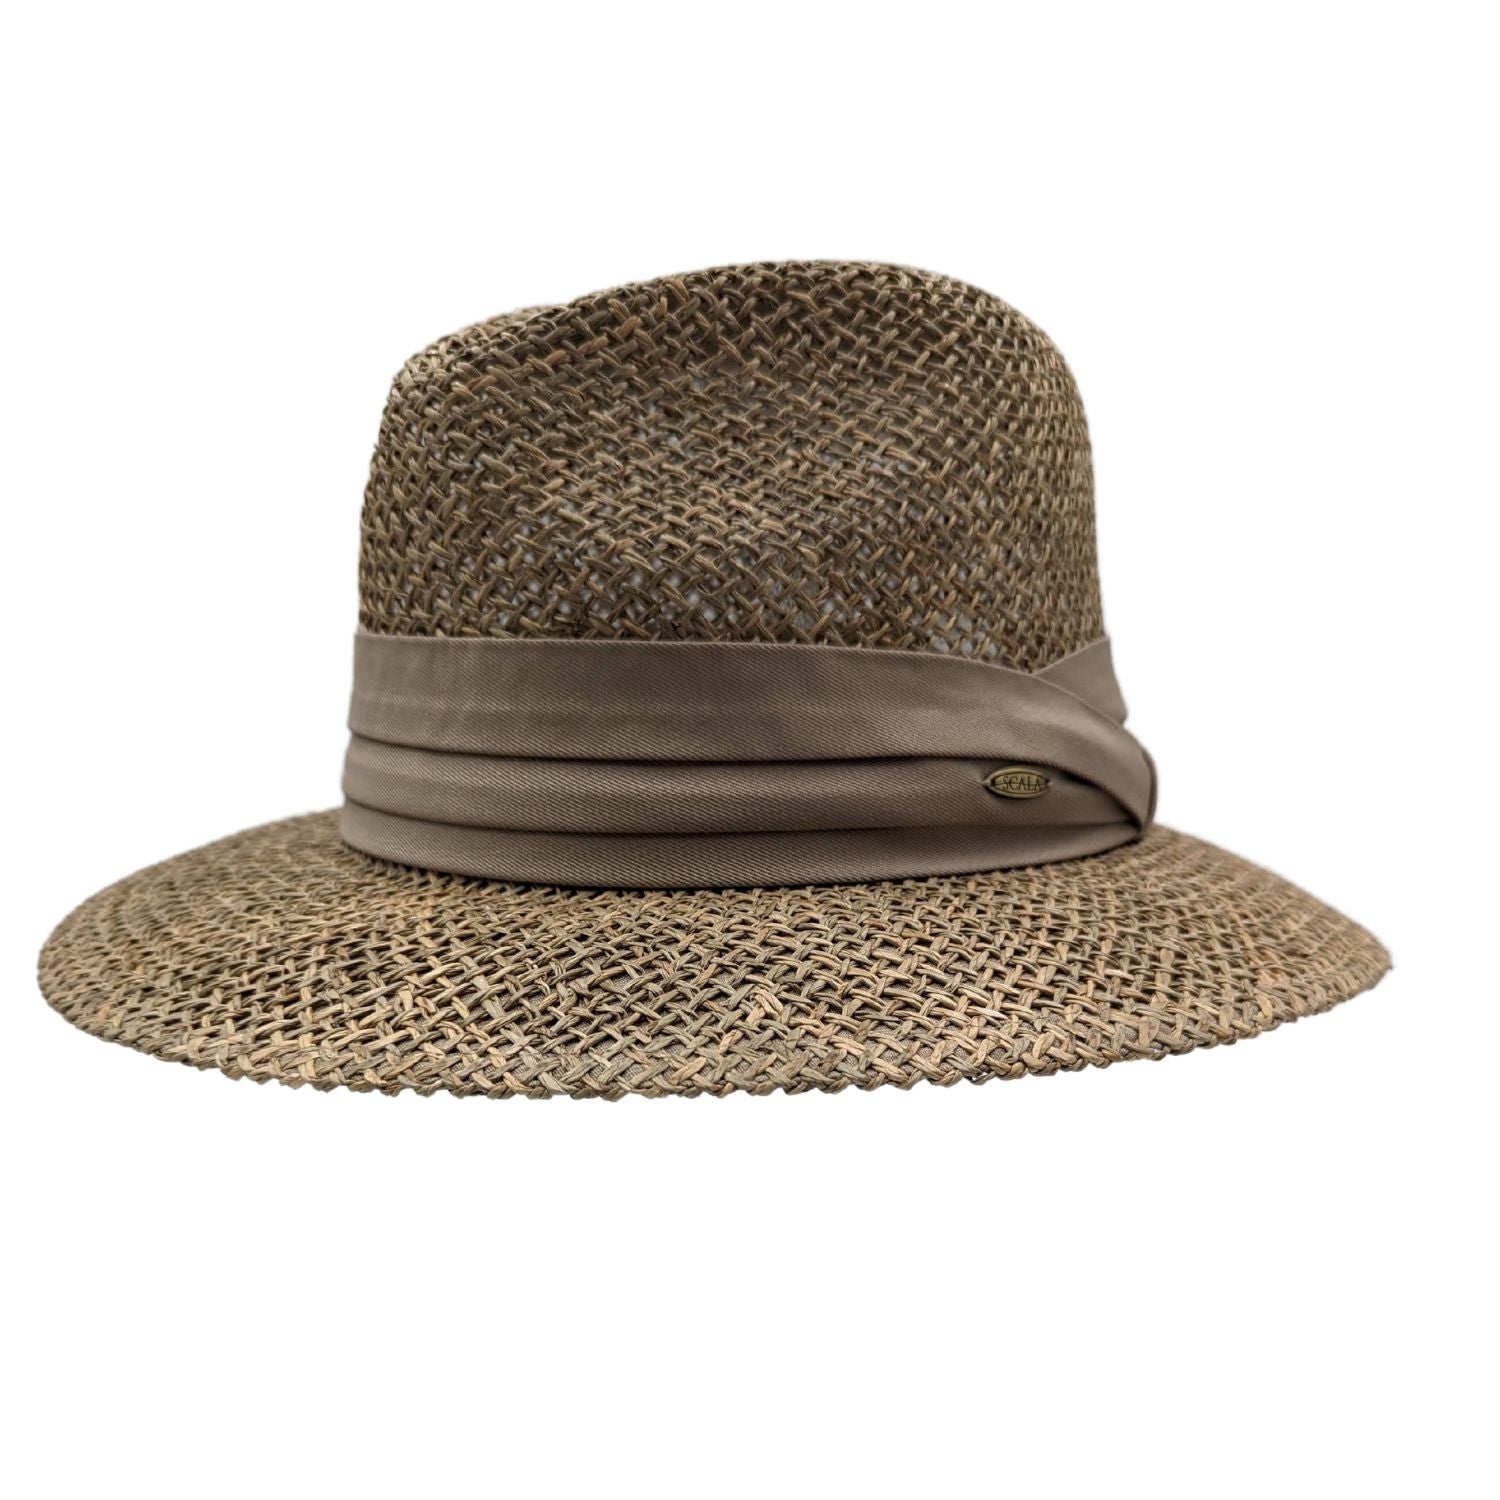 Men's Natural Twisted Seagrass Safari Hat with 3 Brim and Cotton Band –  Suits & More